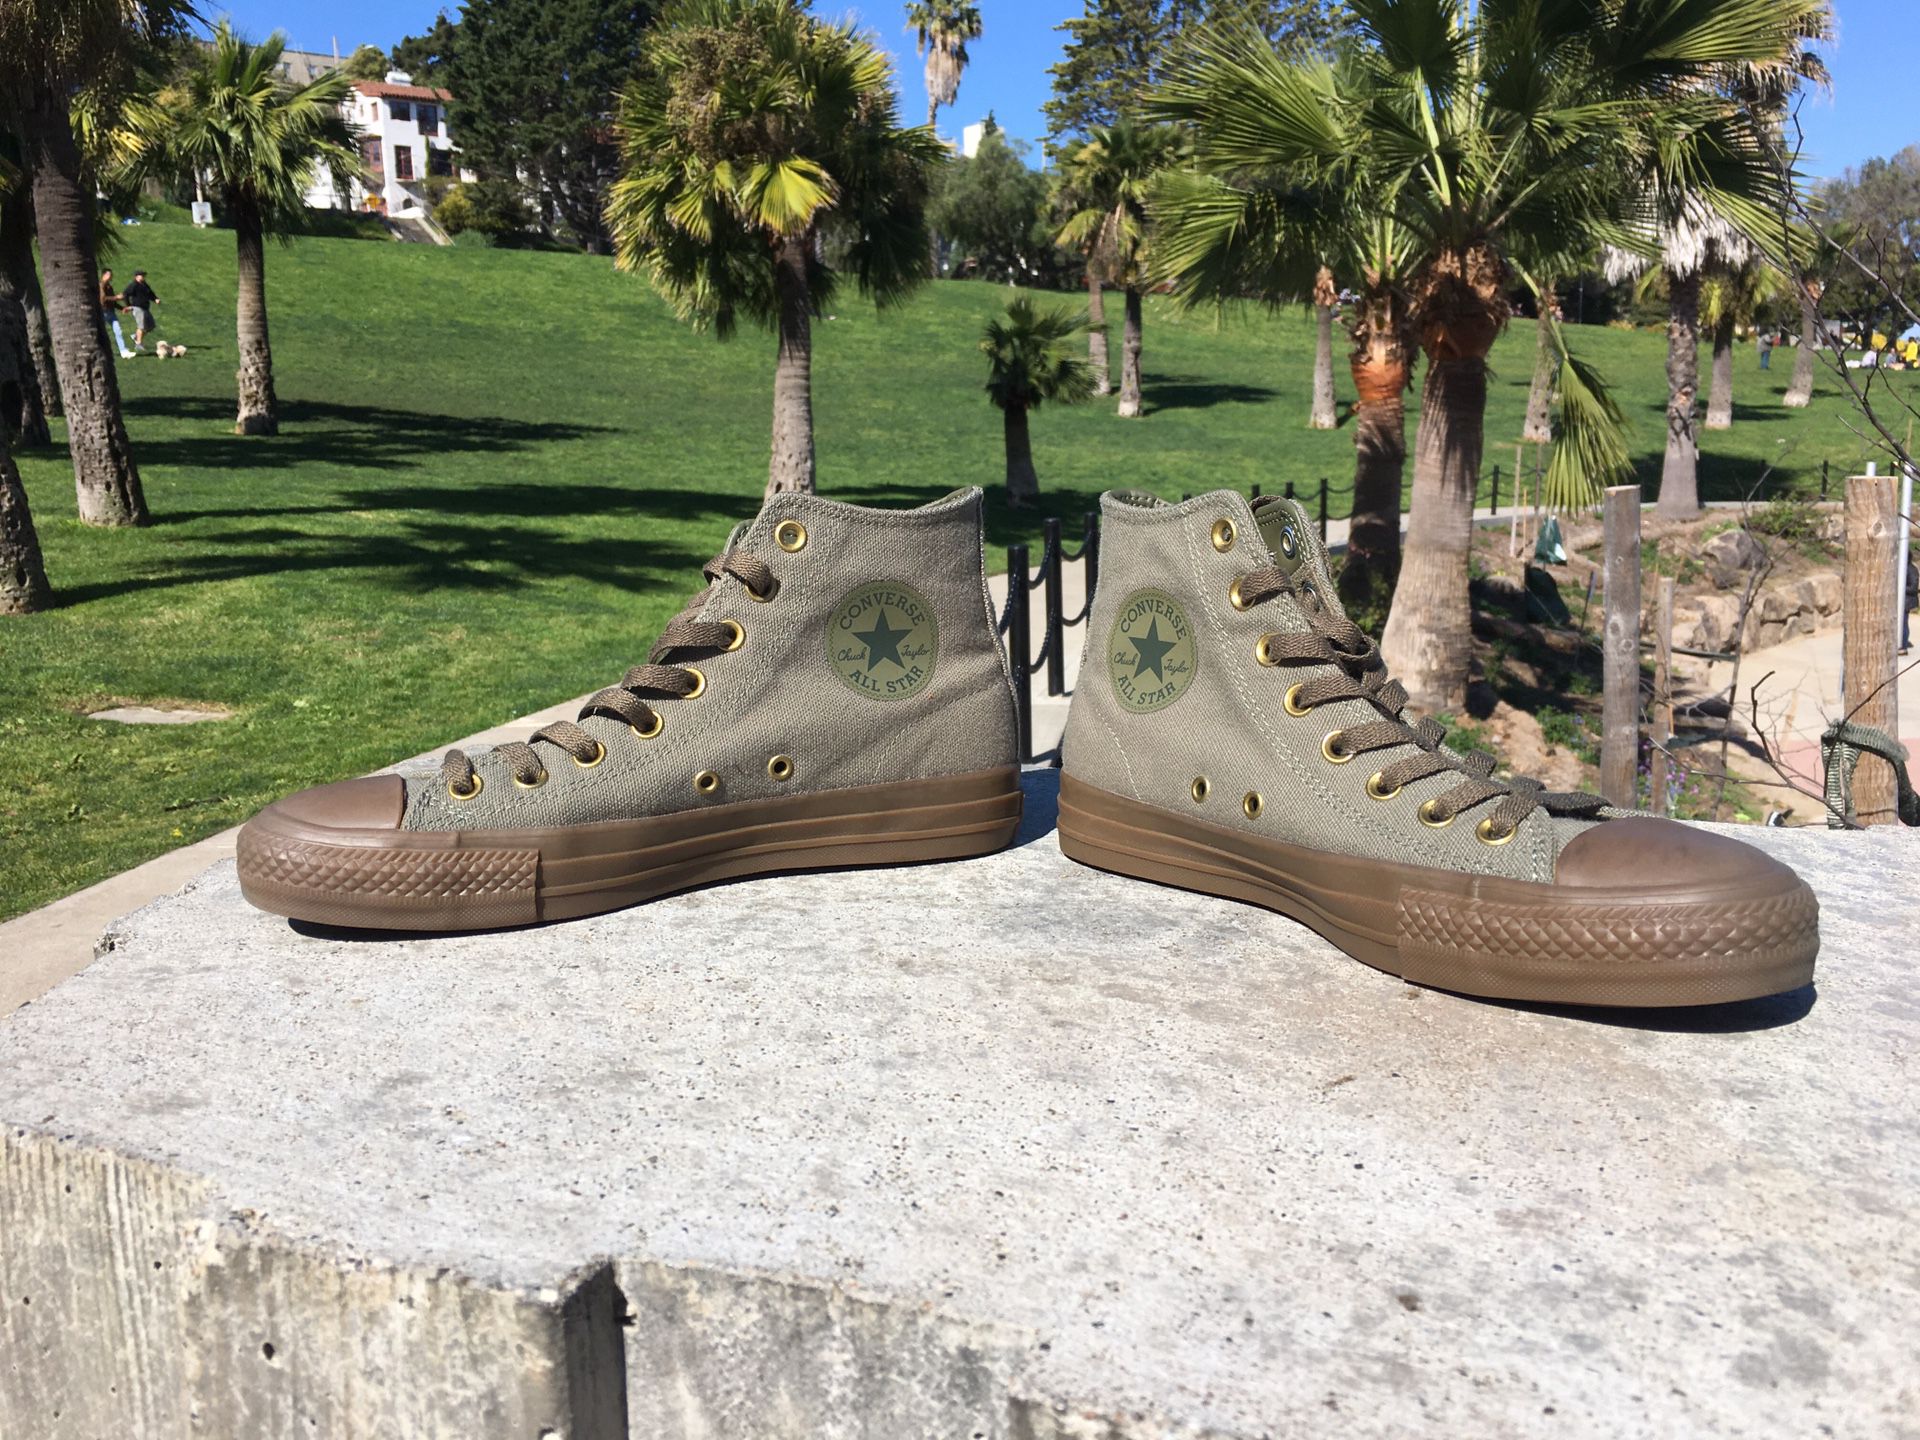 Intacto habilitar Mirar fijamente Converse X Kevin Rodrigues CTAS Pro Hi Canvas 161076C Medium Olive Skate  Shoes Size 7 Brand new without box for Sale in Riverside, CA - OfferUp